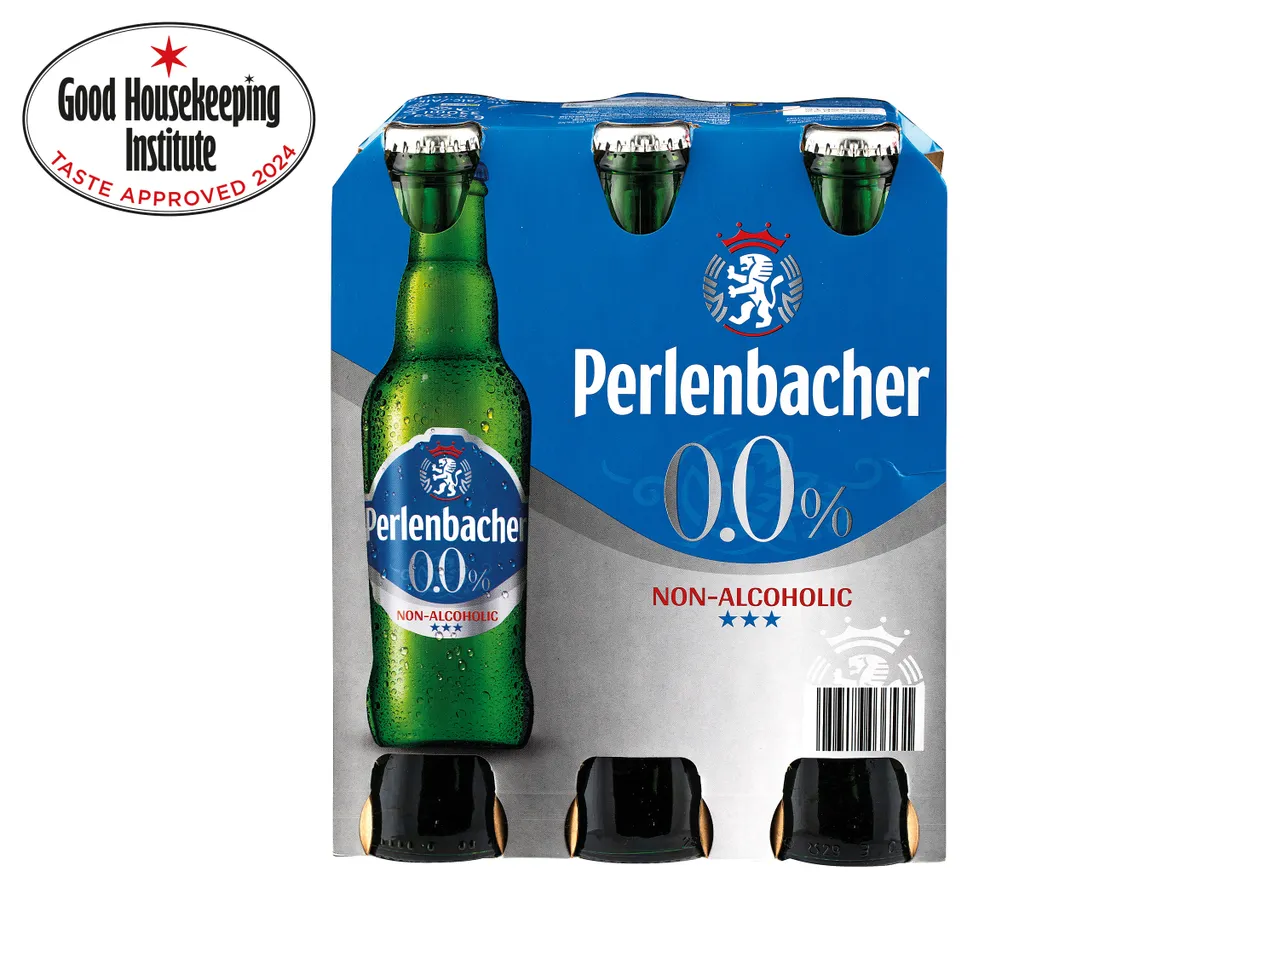 Go to full screen view: Perlenbacher Pils Alcohol-Free - Image 1